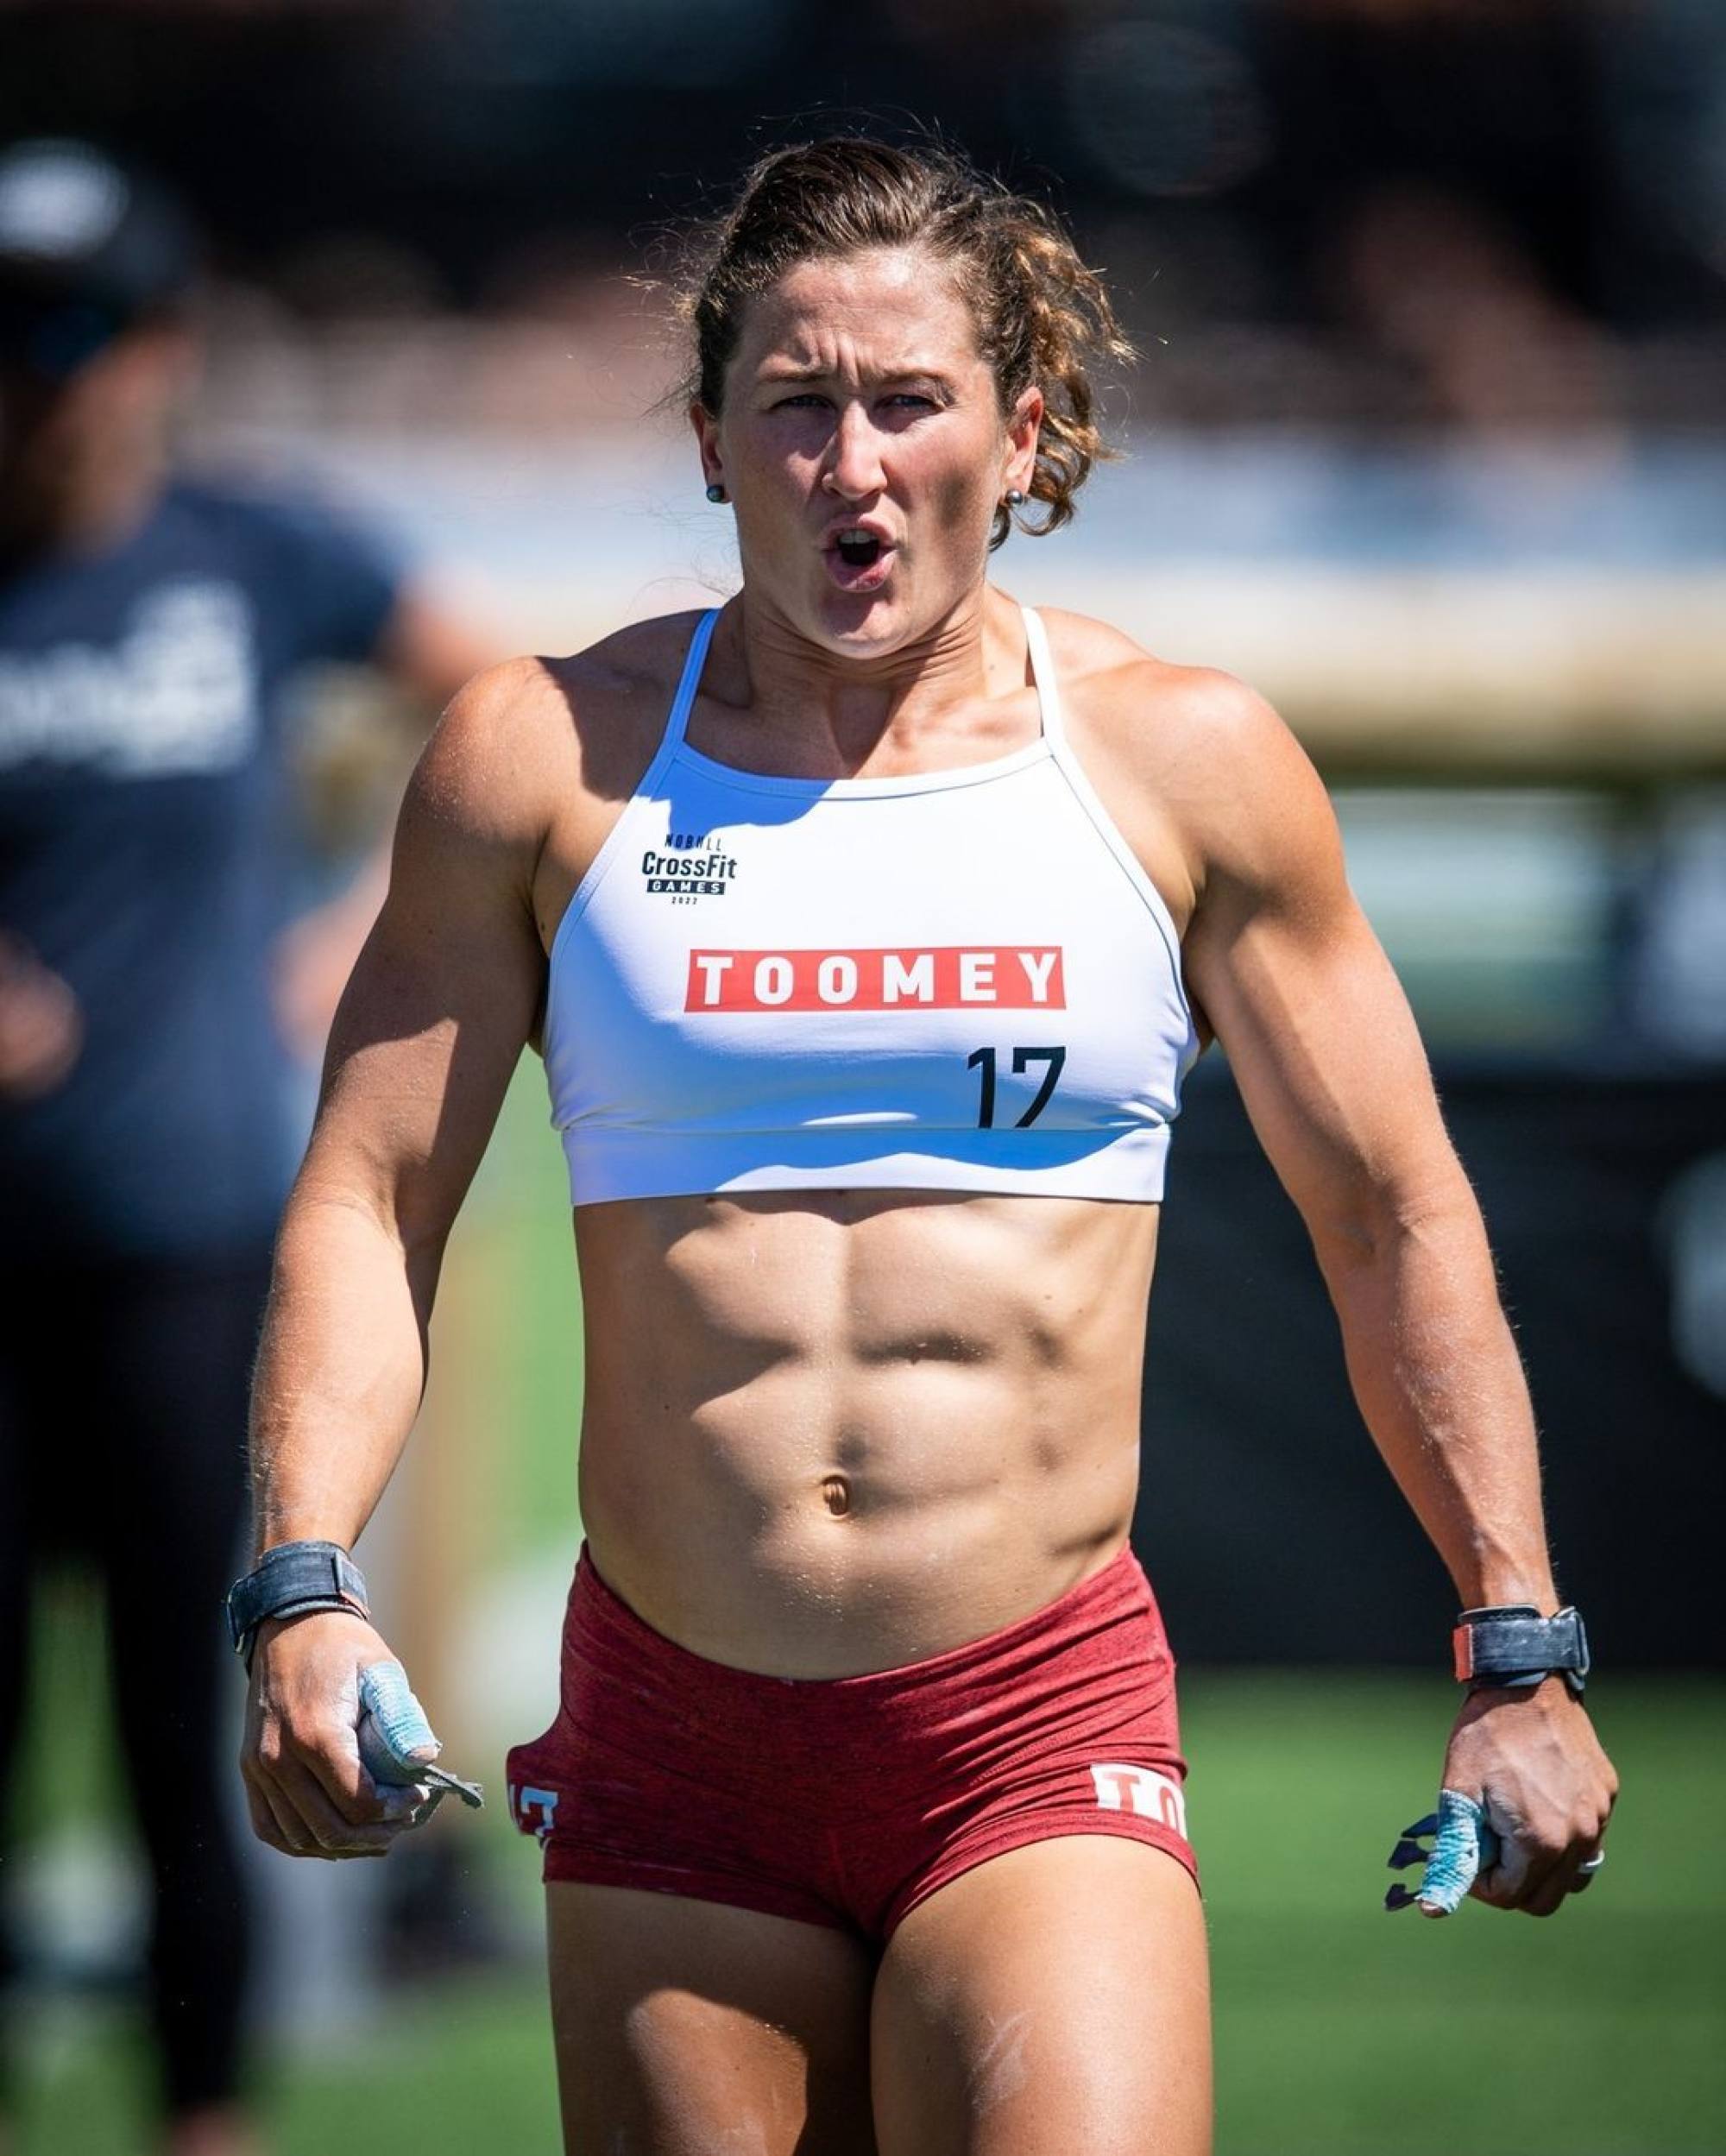 Toomey and Justin Medeiros win CrossFit Games 2022, claiming consecutive Fittest on Earth titles | South China Morning Post